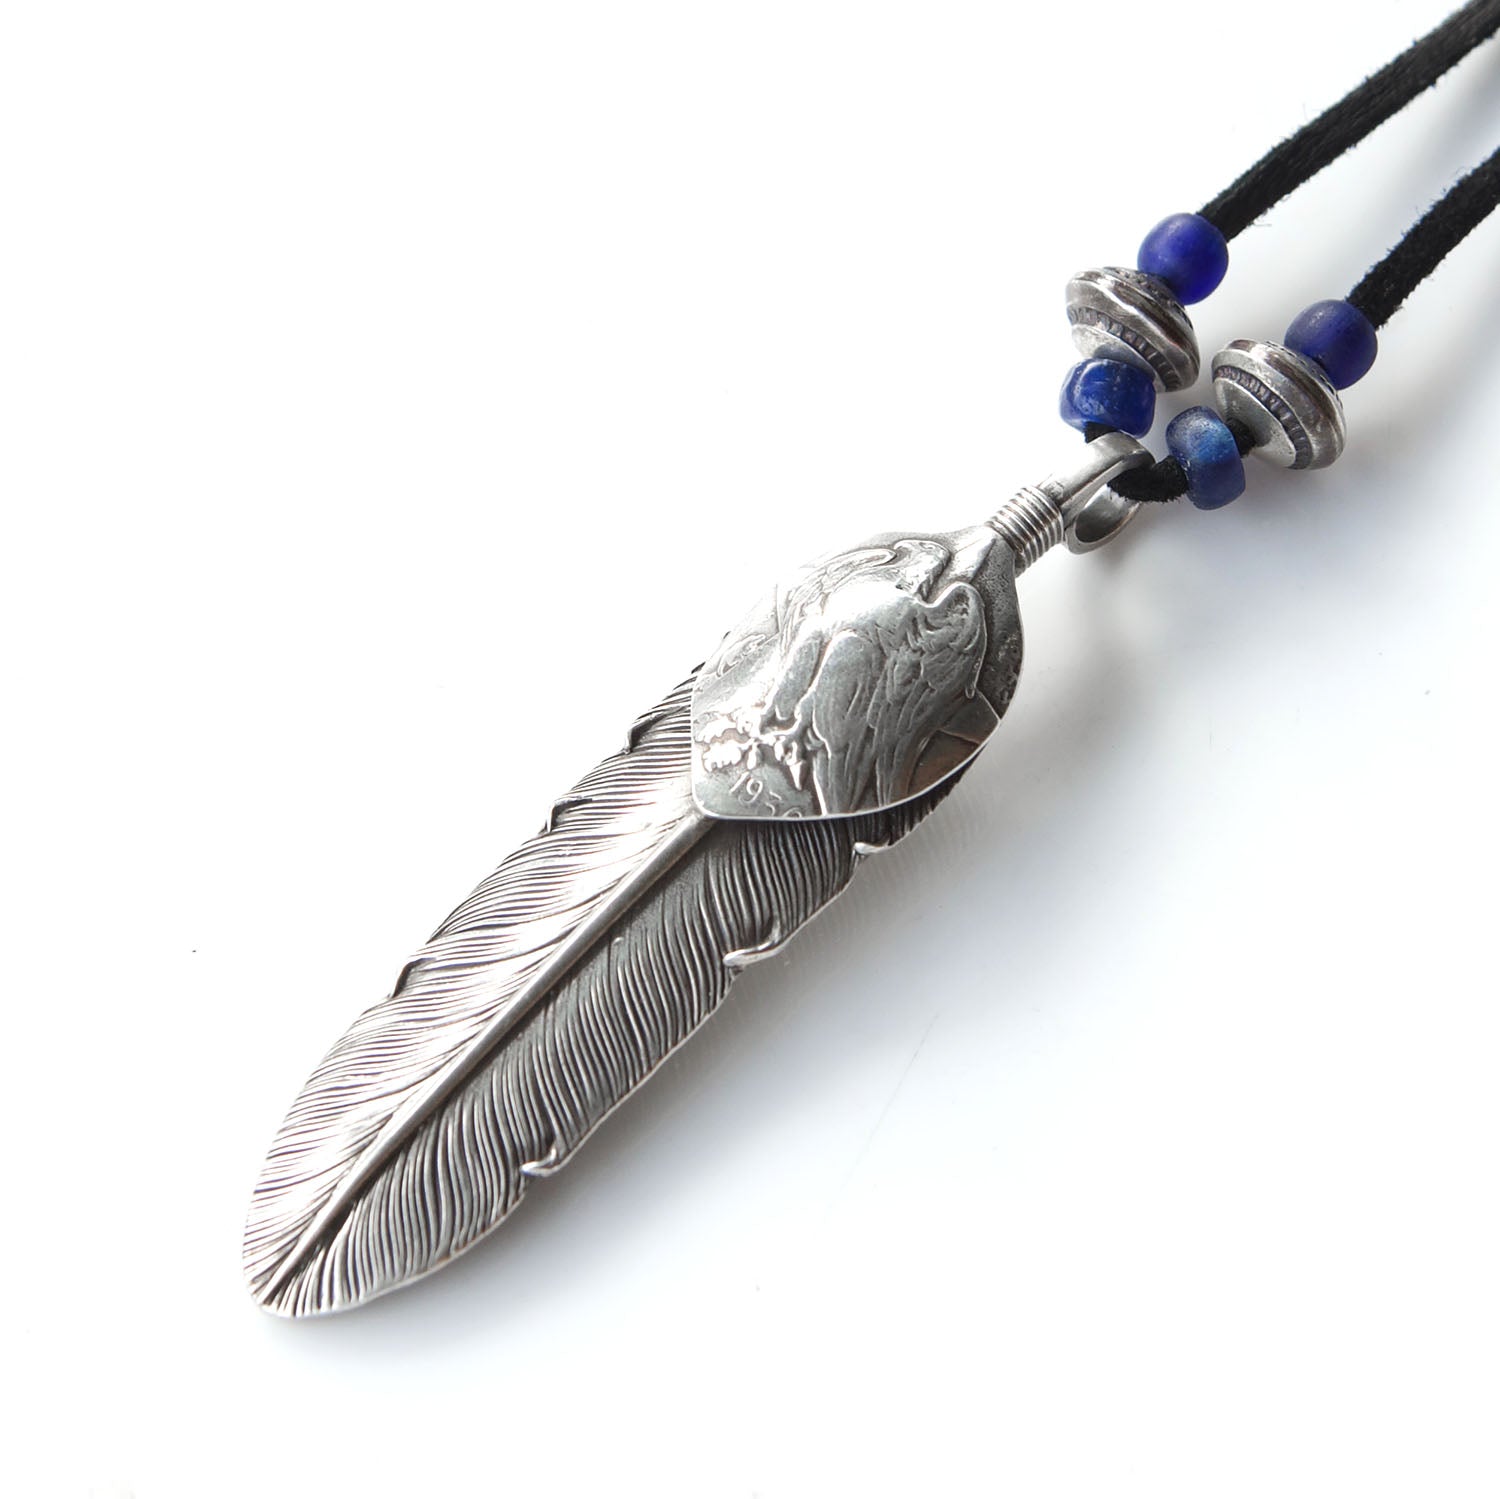 SPECIAL PEACE FEATHER with TEXAS CENTENNIAL HEART - May club